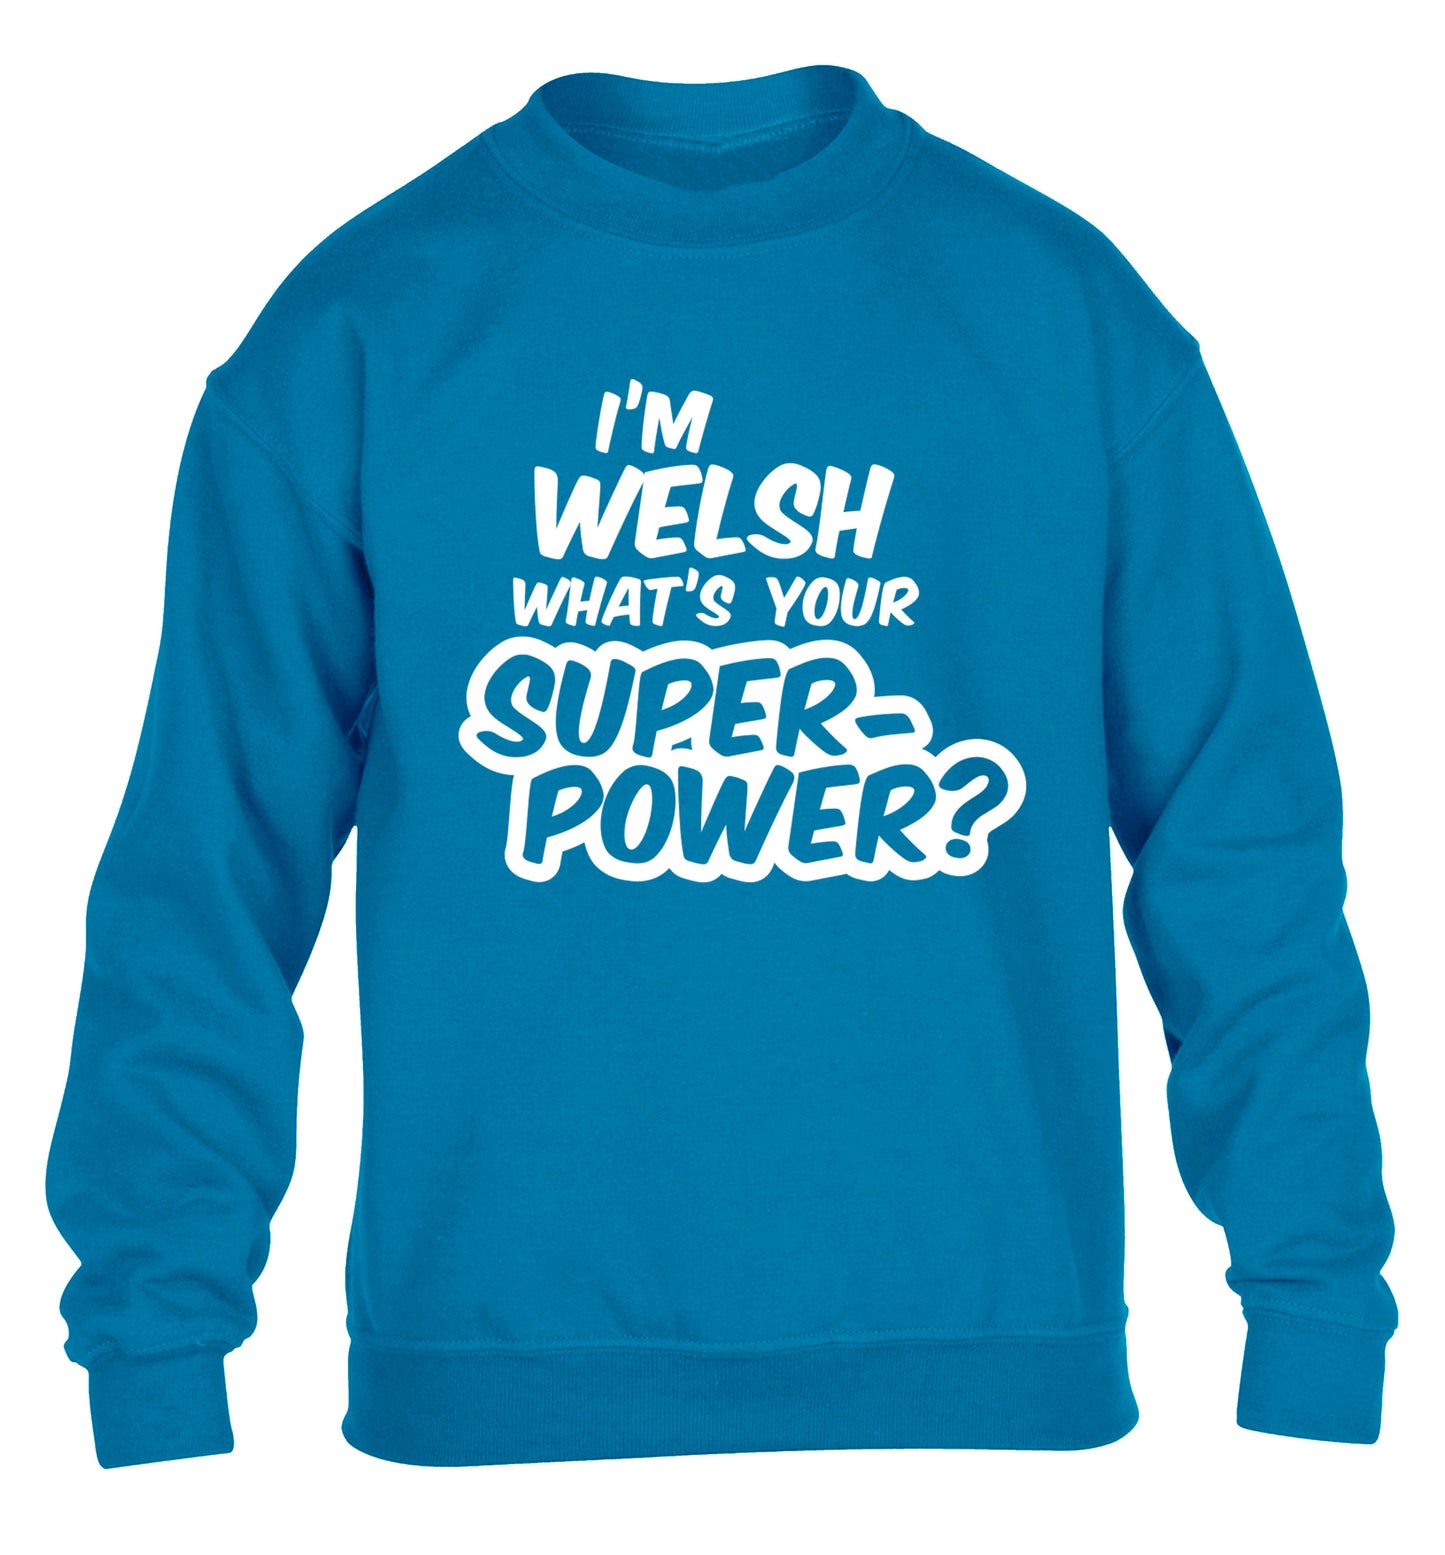 I'm Welsh what's your superpower? children's blue sweater 12-13 Years